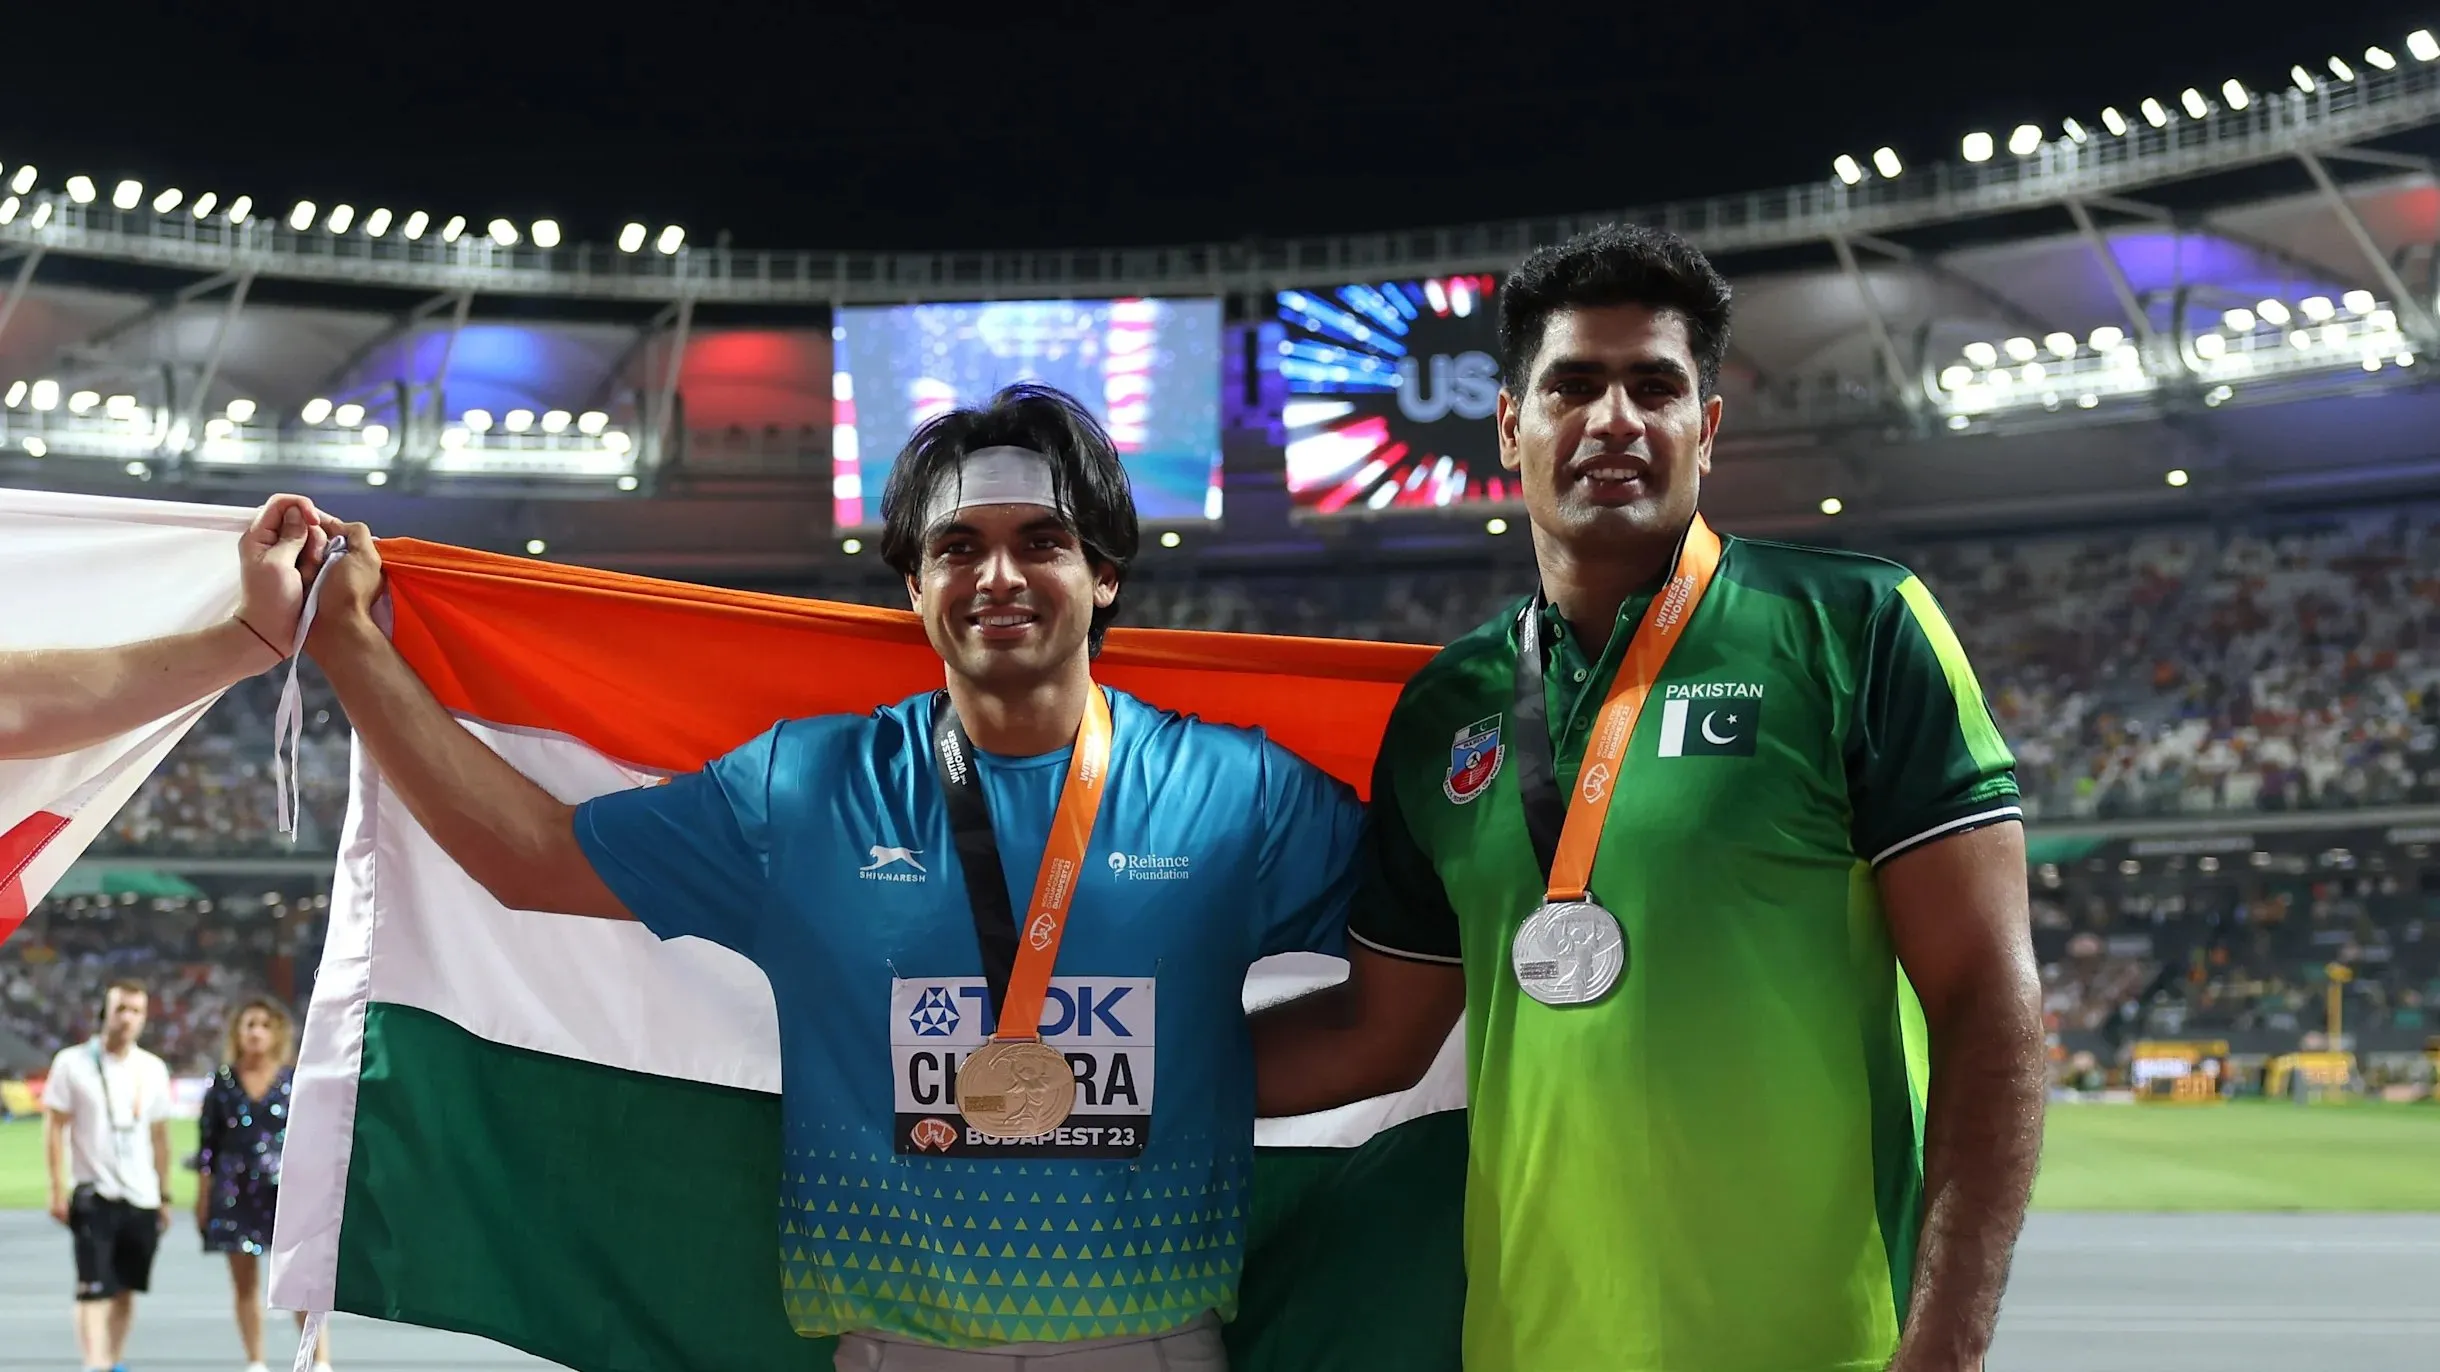 Gold medalist Neeraj Chopra, of India, and silver medalist Arshad Nadeem, of Pakistan, right, pose after finishing the Men's javelin throw final during the World Athletics Championships in Budapest, Hungary, Sunday, Aug. 27, 2023.   Image | AP Photo/Matthias Schrader